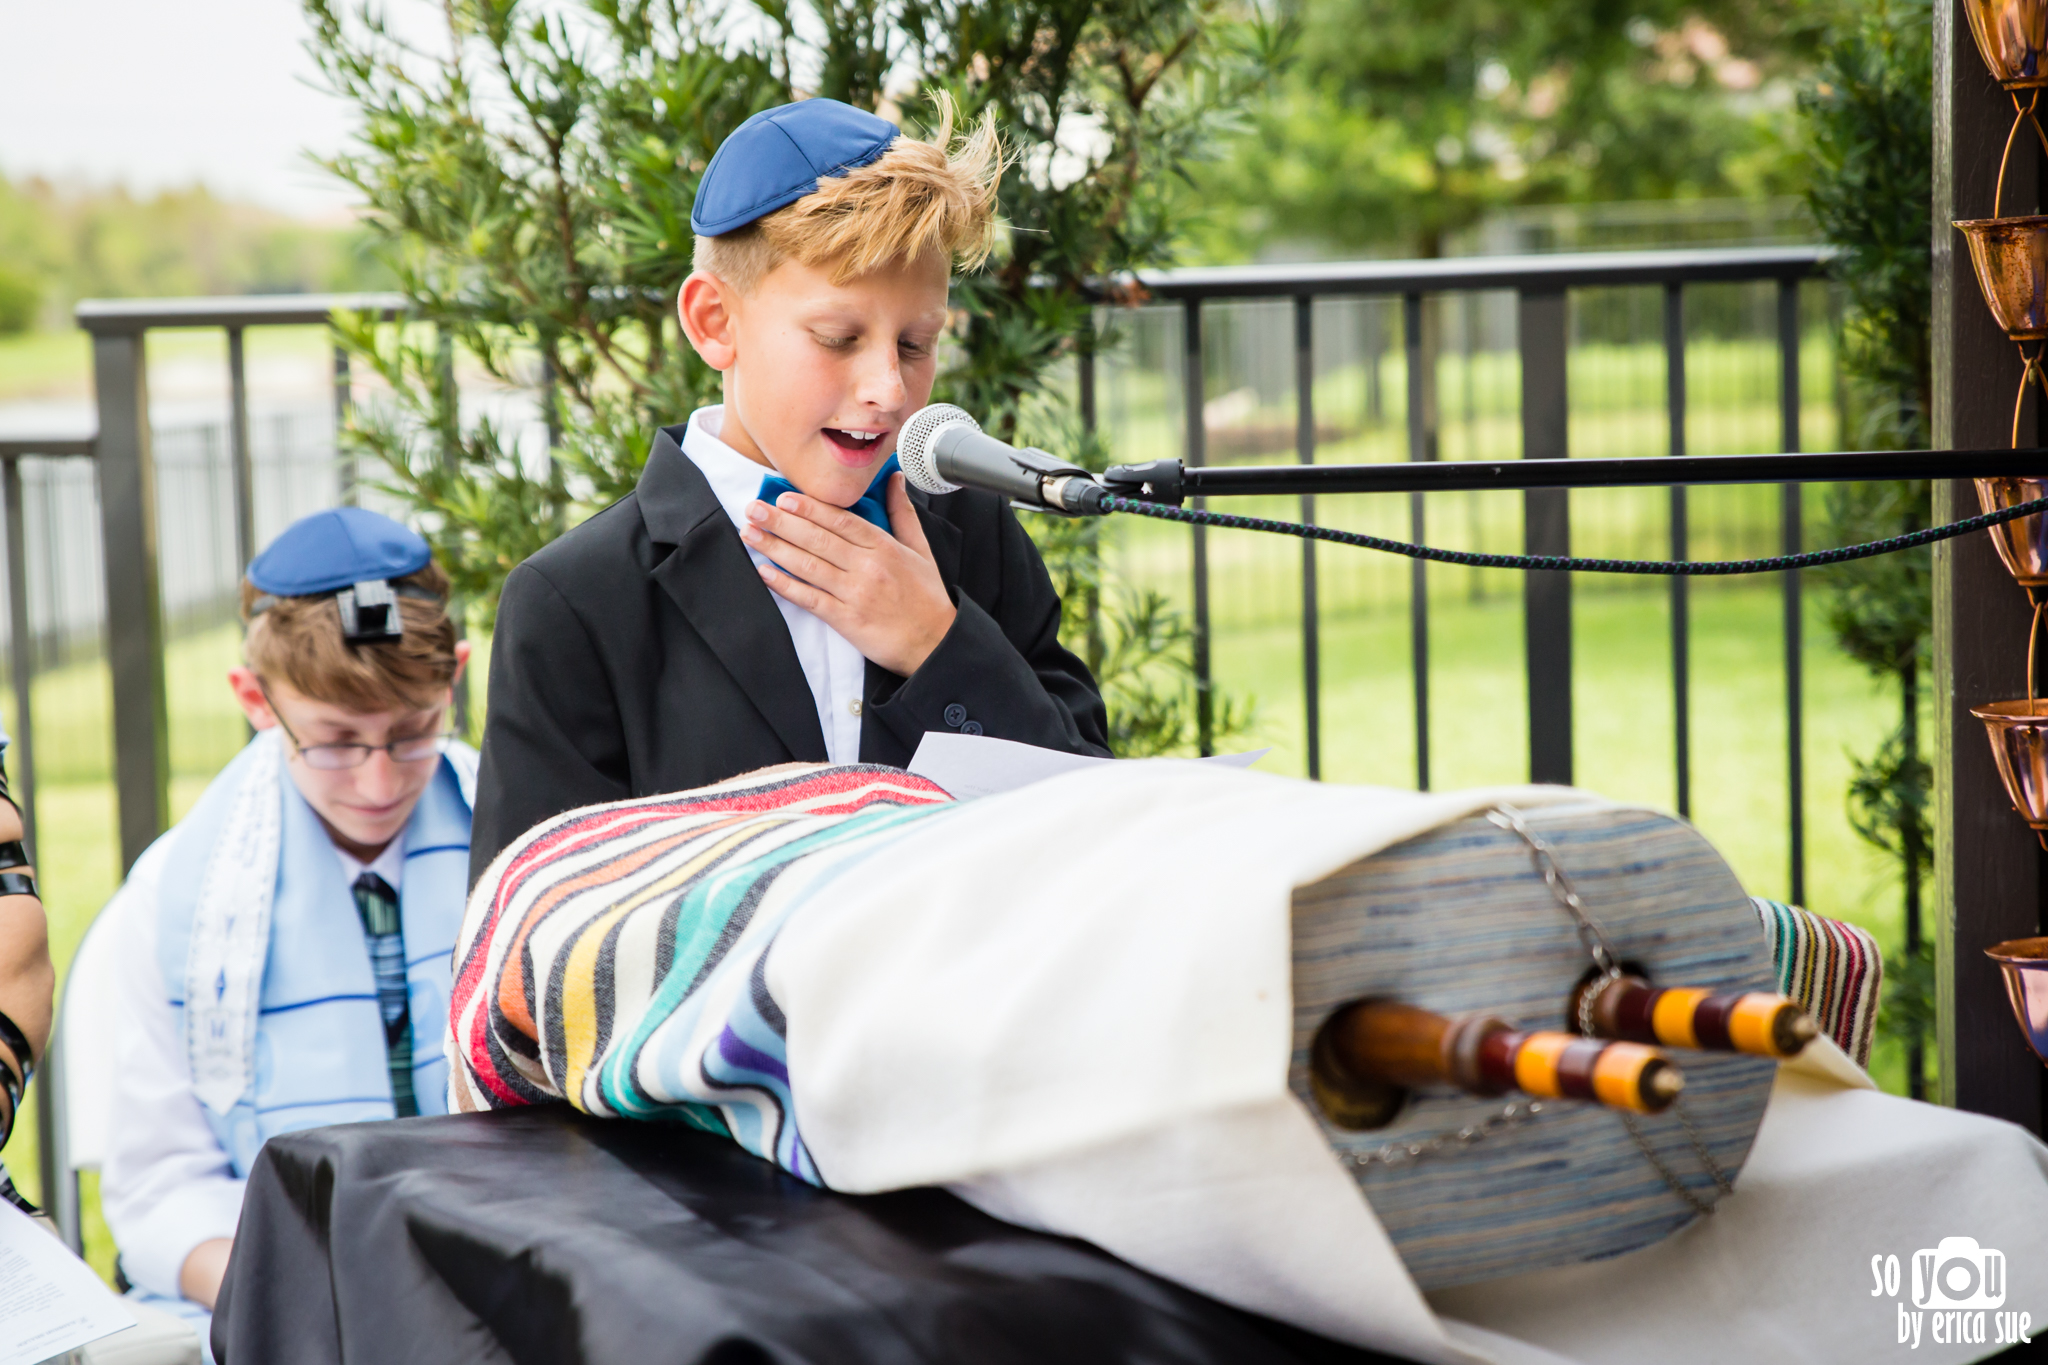 bar-mitzvah-photography-ft-lauderdale-so-you-by-erica-sue-0684.jpg